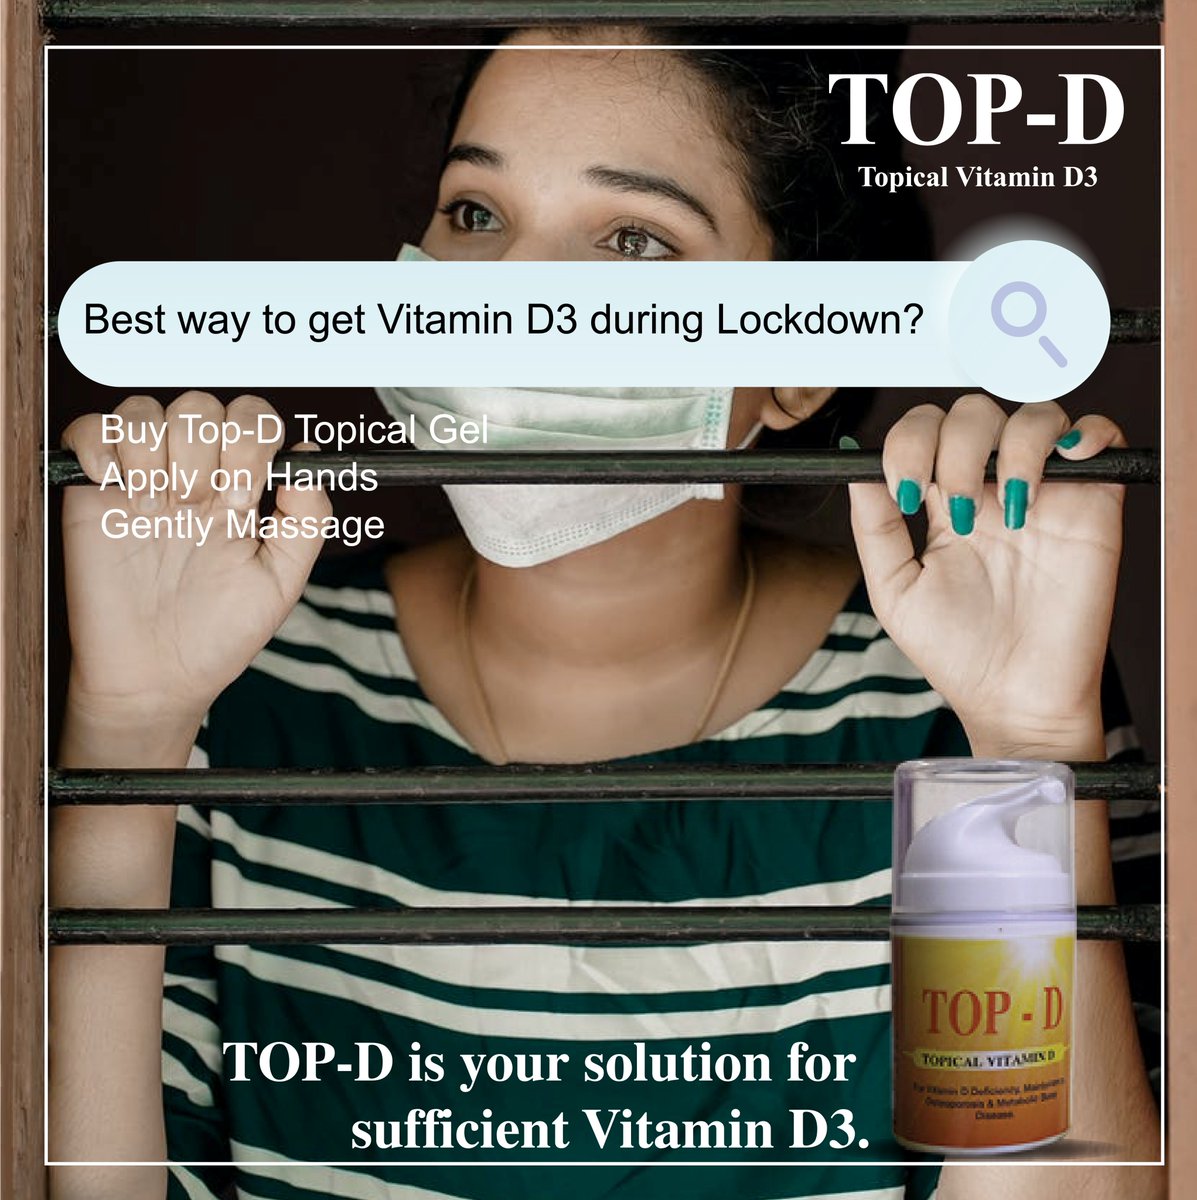 #Lockdown may not let you have enough exposure to sun. It means less chance to receive Vitamin D3. #TOP-D #TopicalGel restores Vitamin D3 balance without any side effects. It is easy to use and works more effectively than oral supplements. Buy #TOP-D. amzn.to/36NnS3z.